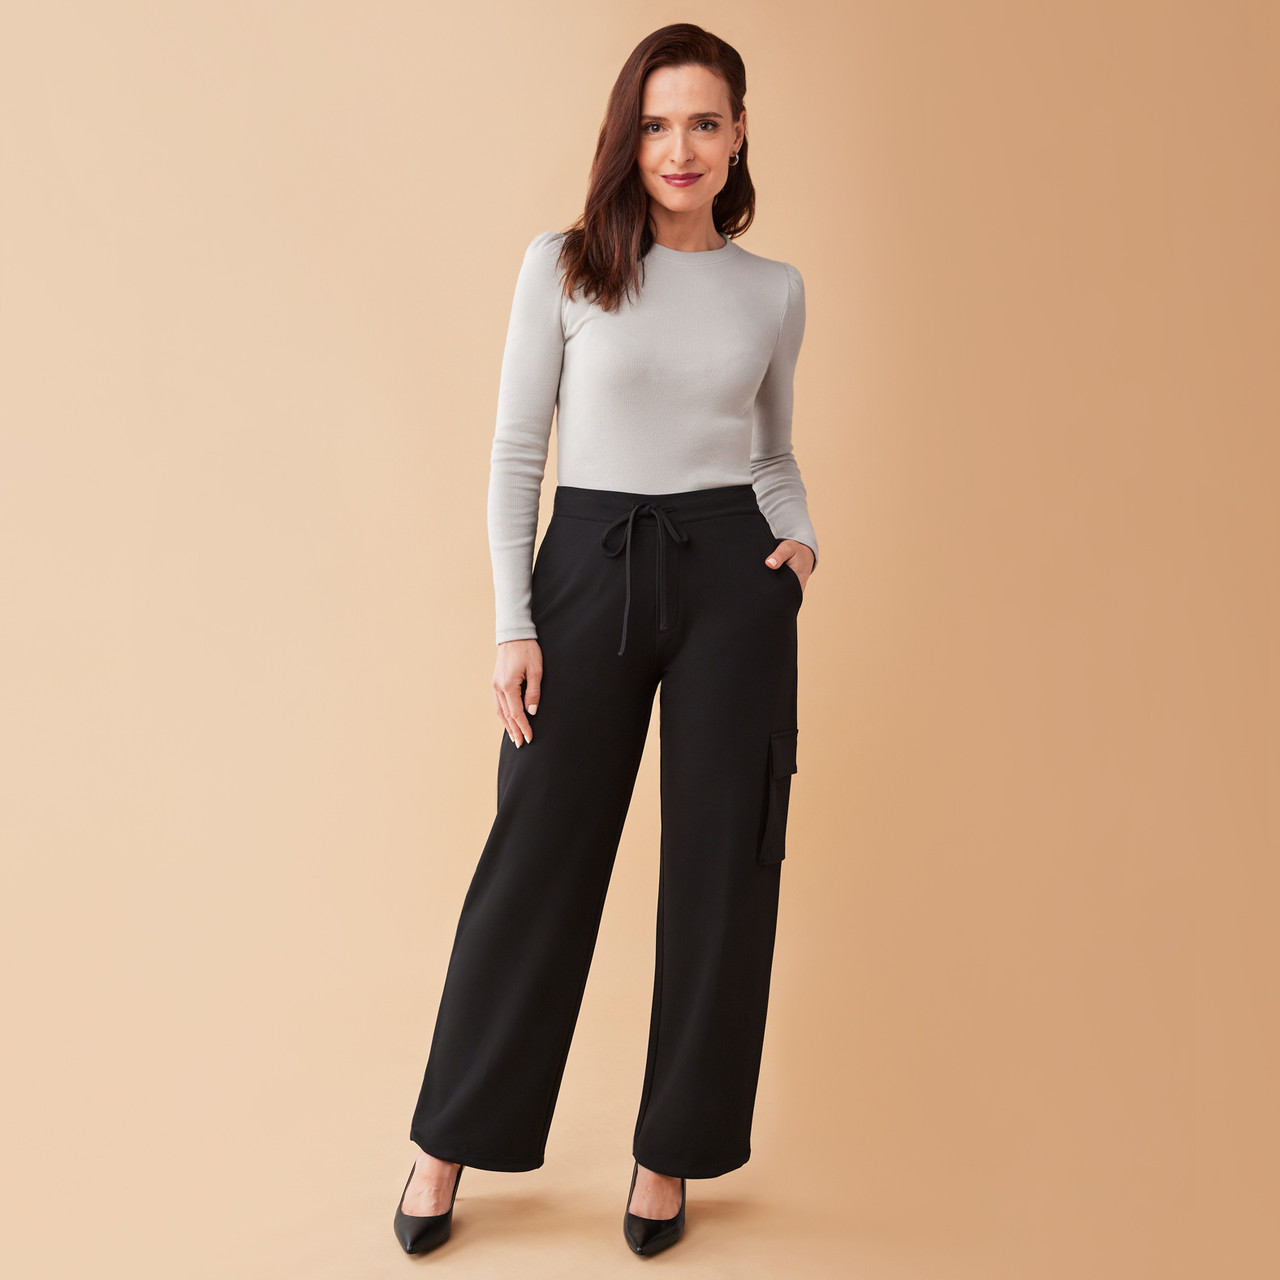 Women's Soft Cargo Pant | Northern Reflections